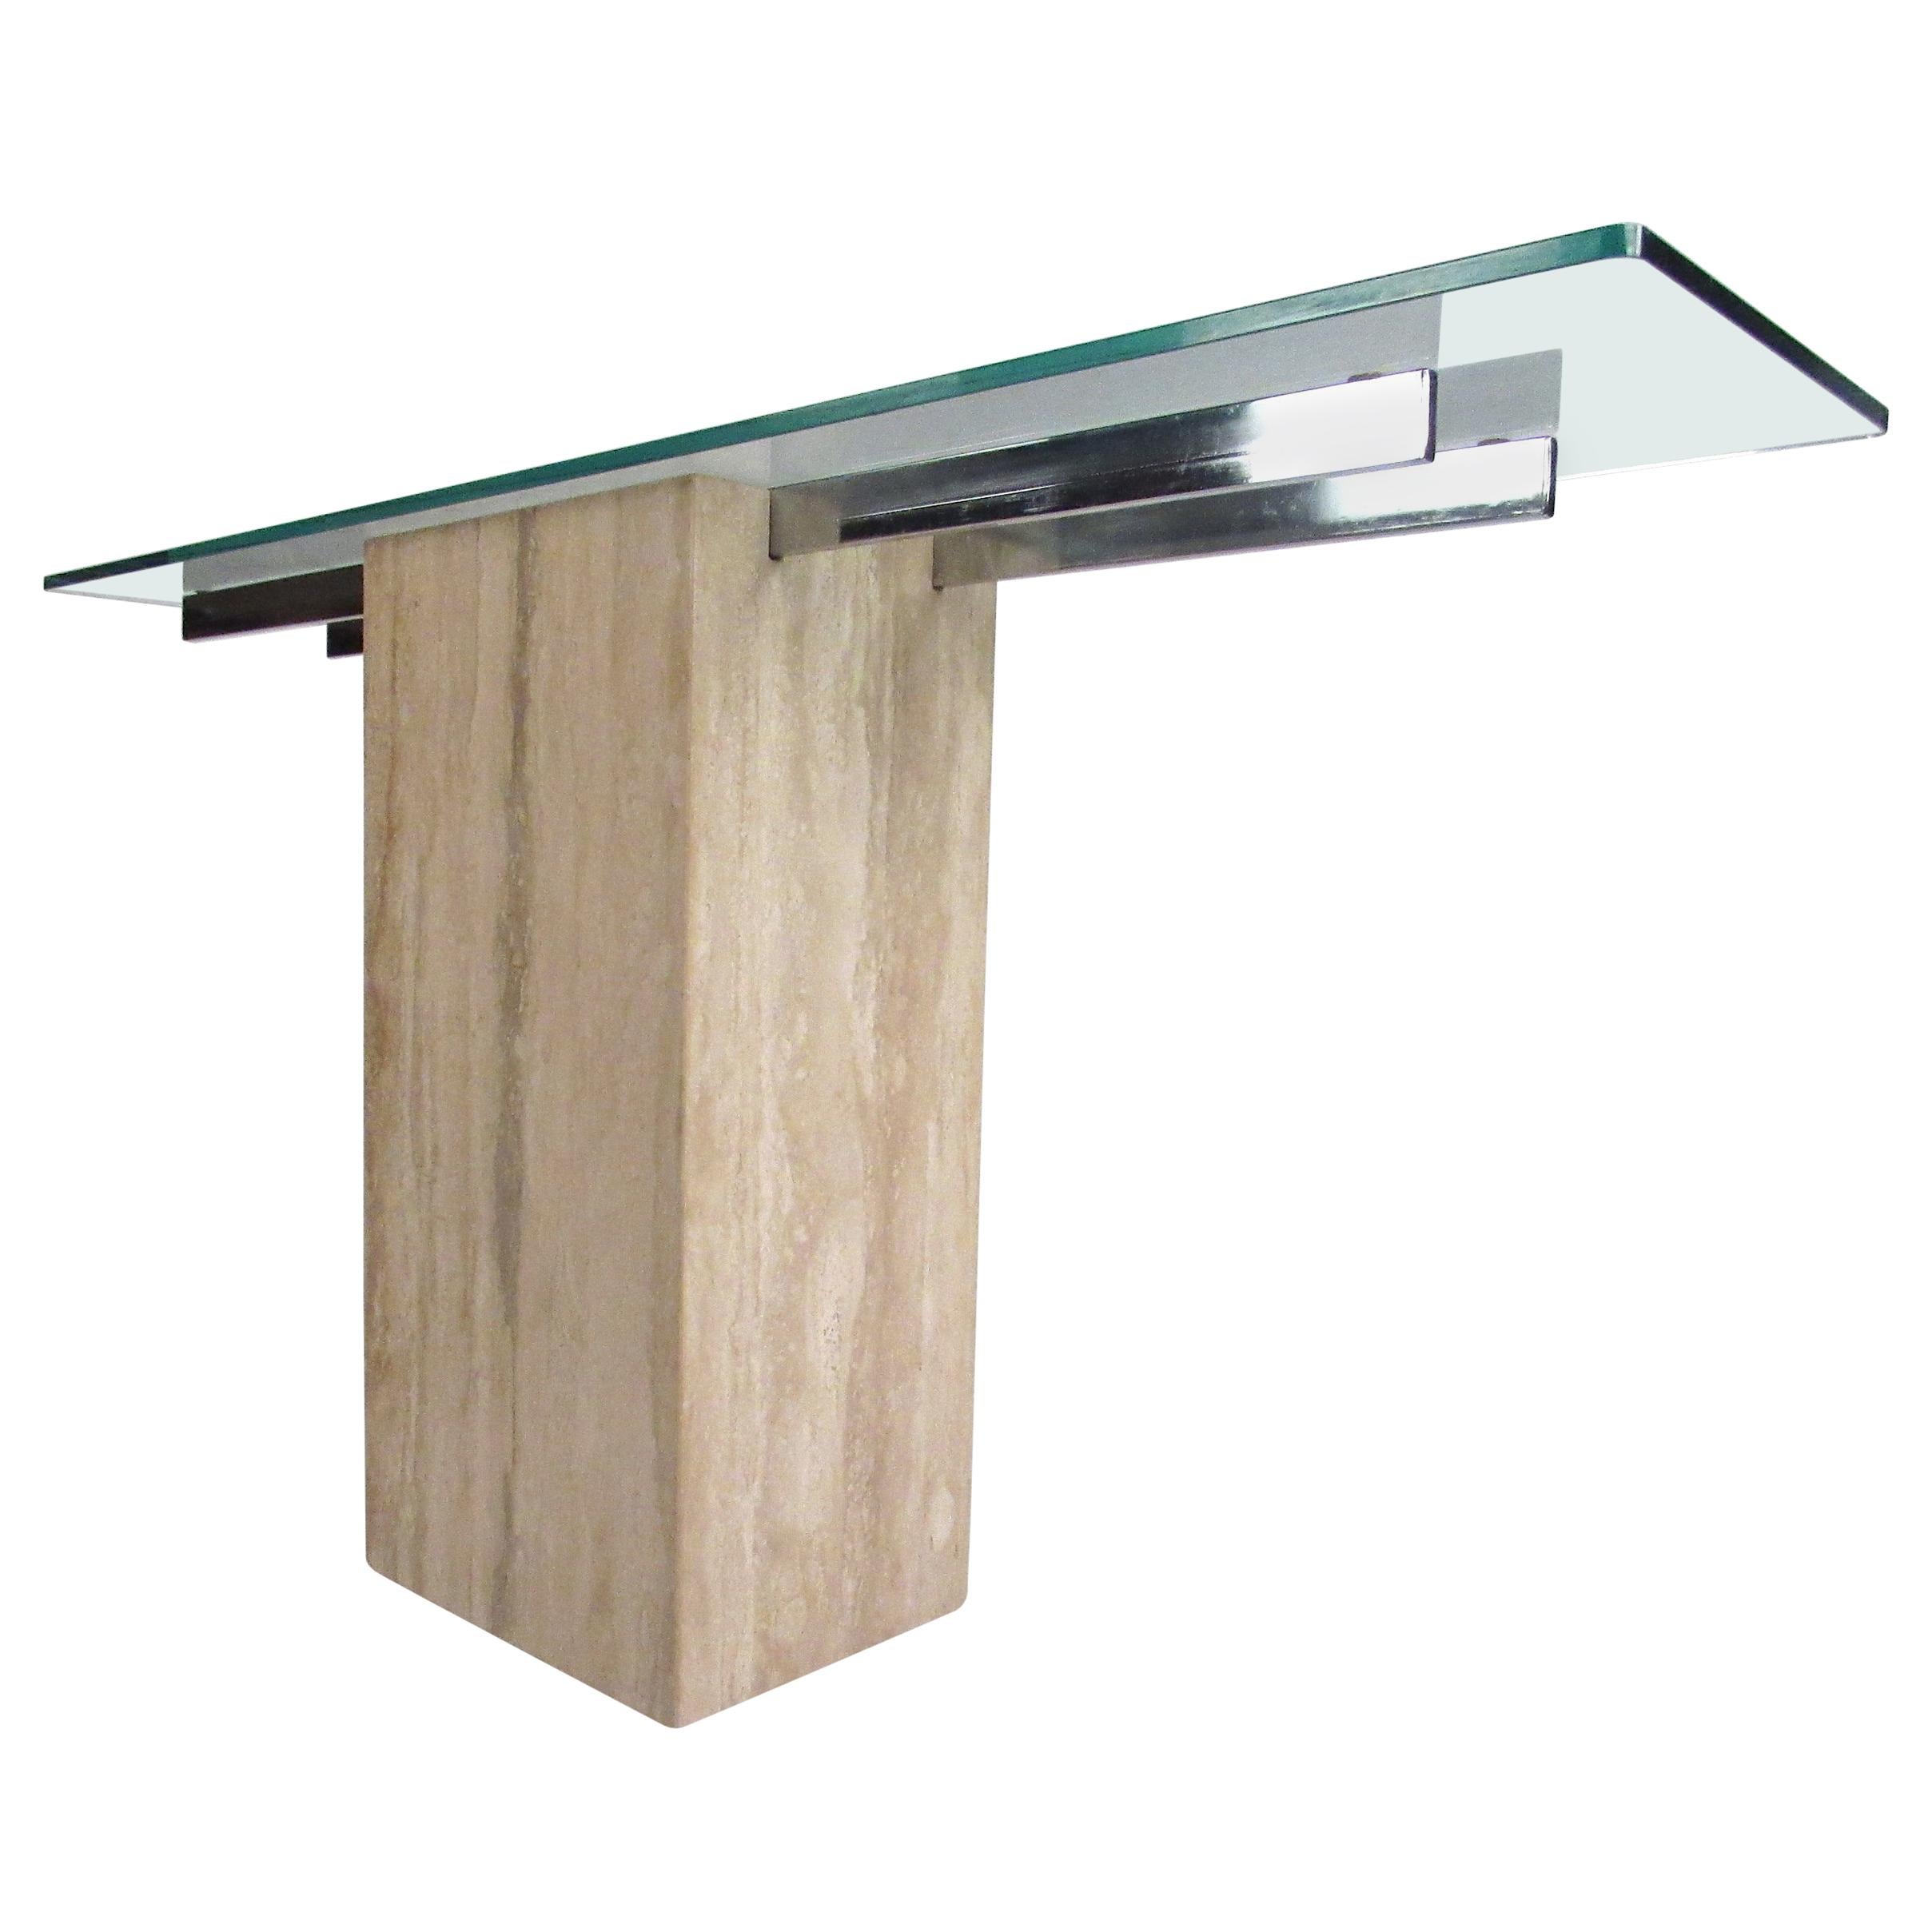 Midcentury Italian Travertine and Glass Console Table by Artedi, 1970s